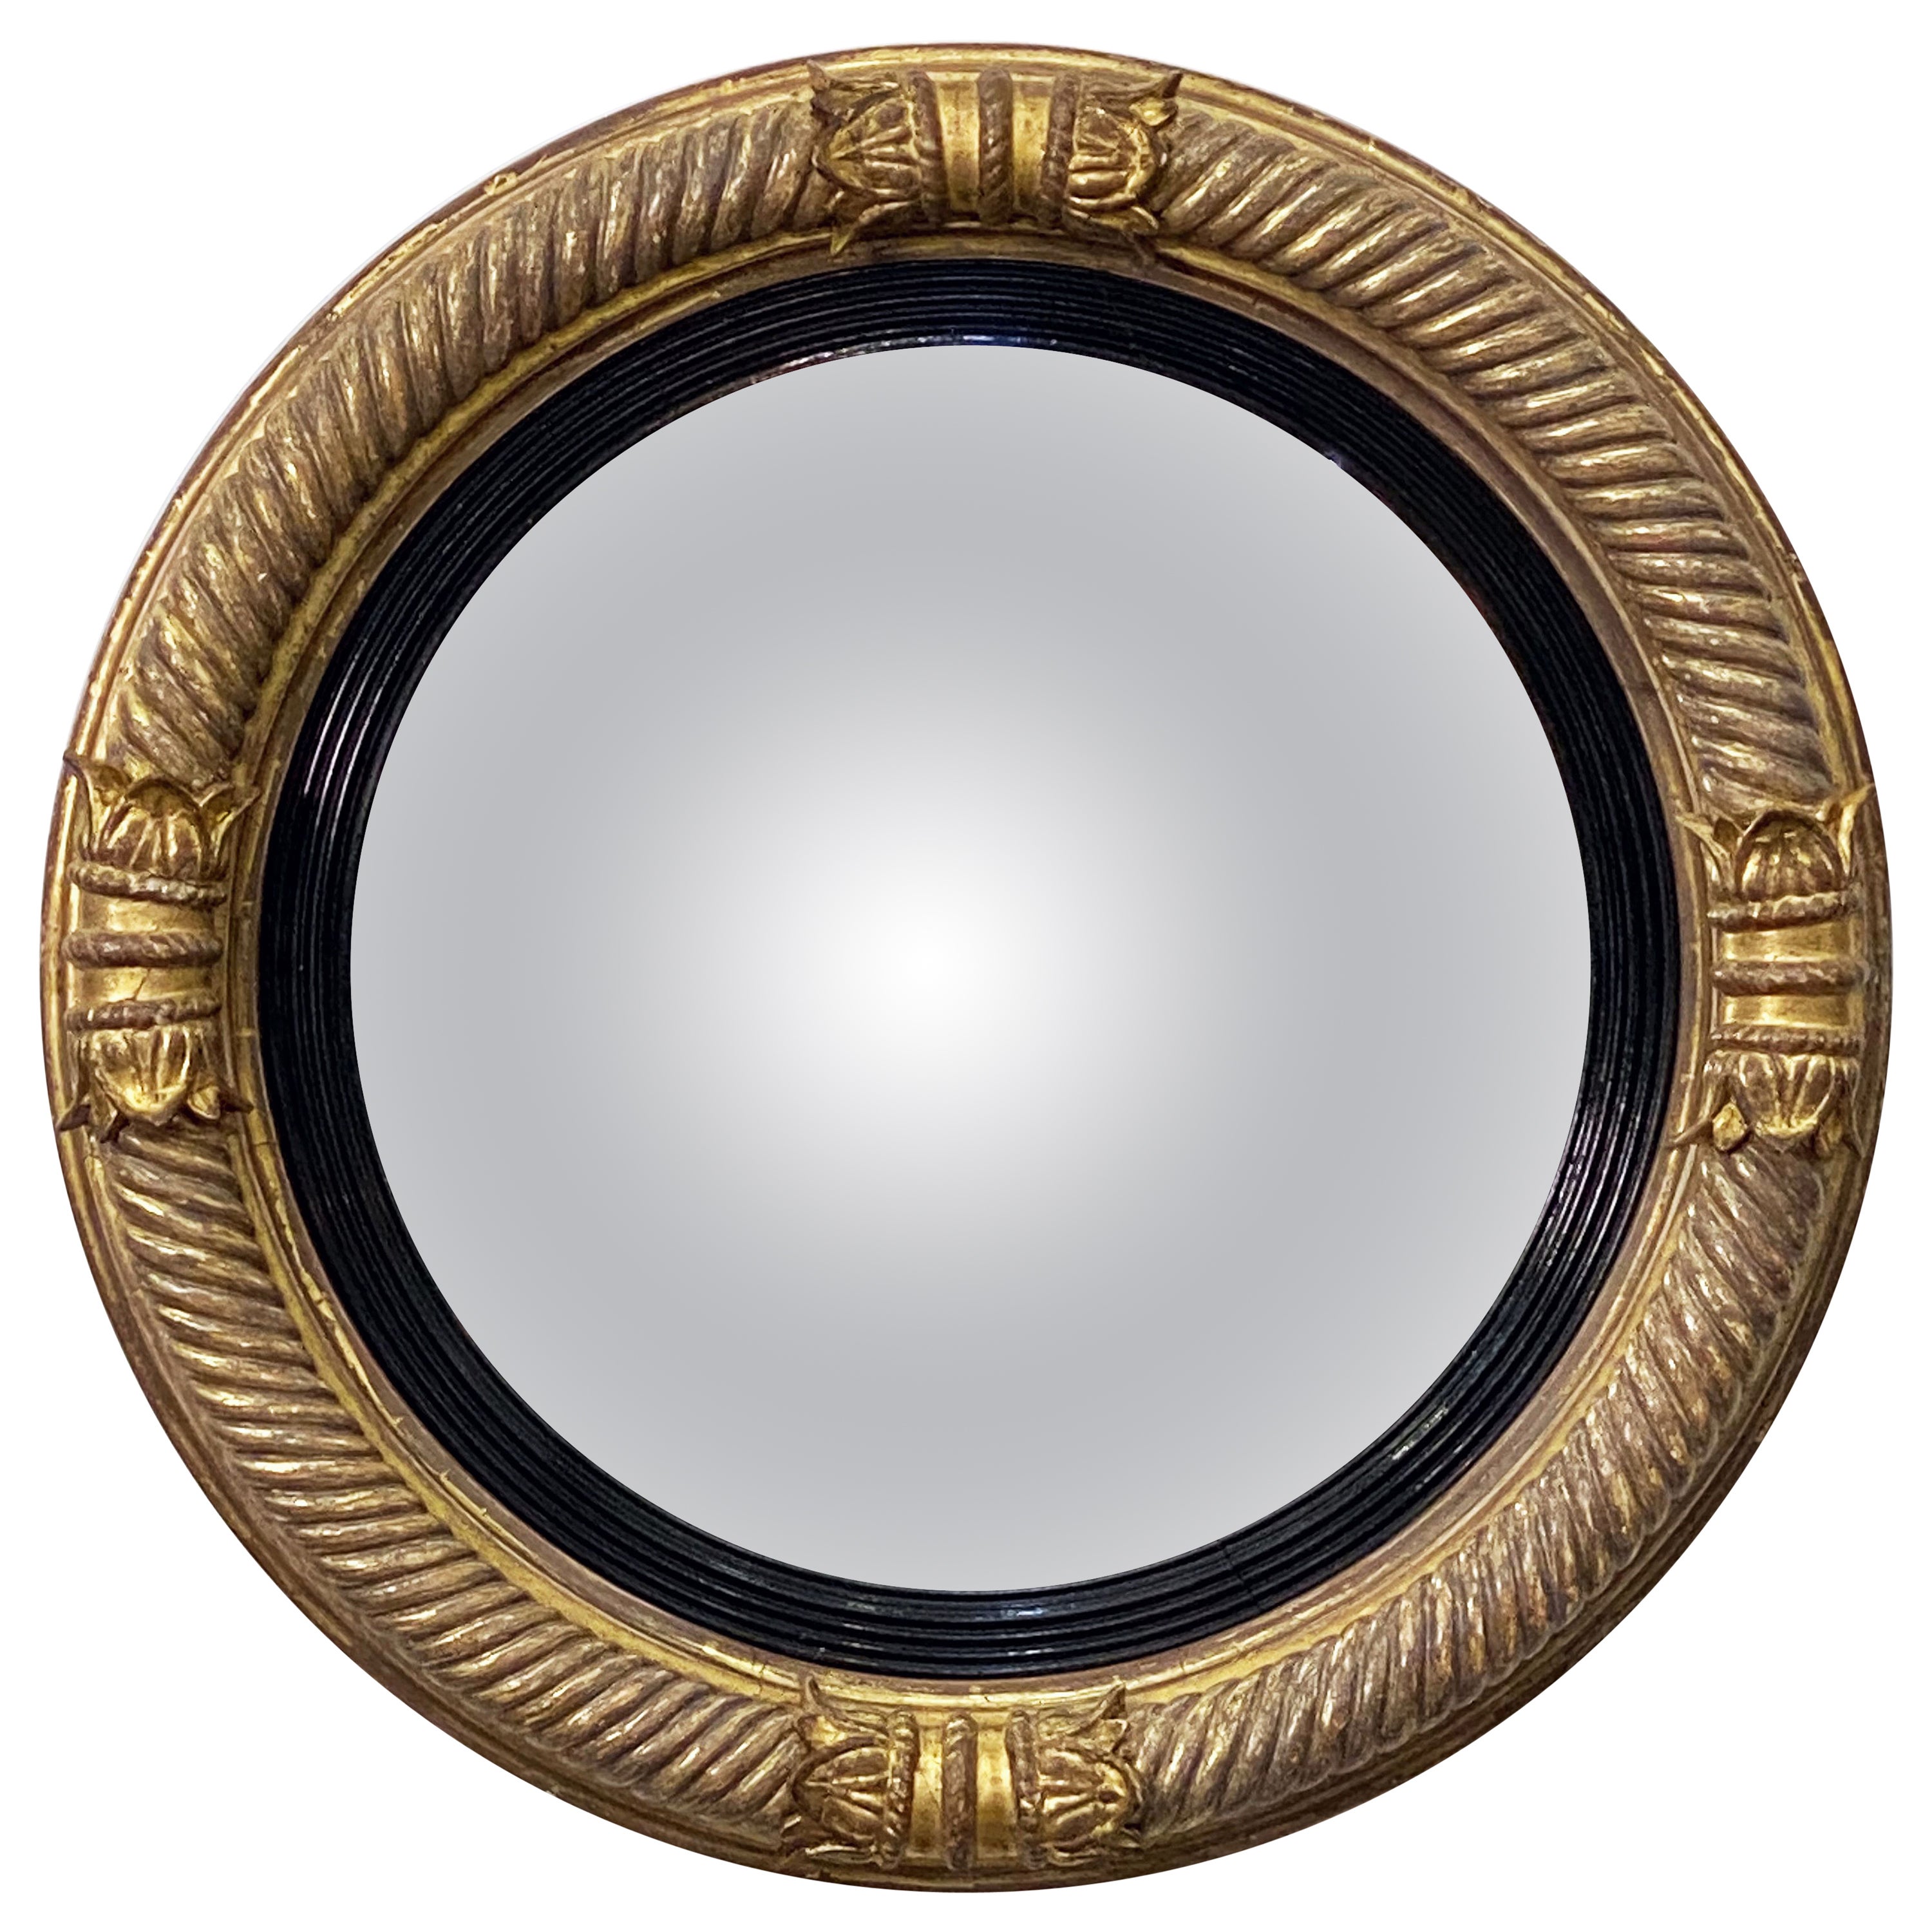 English Gilt and Ebony Convex Mirror from the Regency Era (Diameter 21 1/4) For Sale